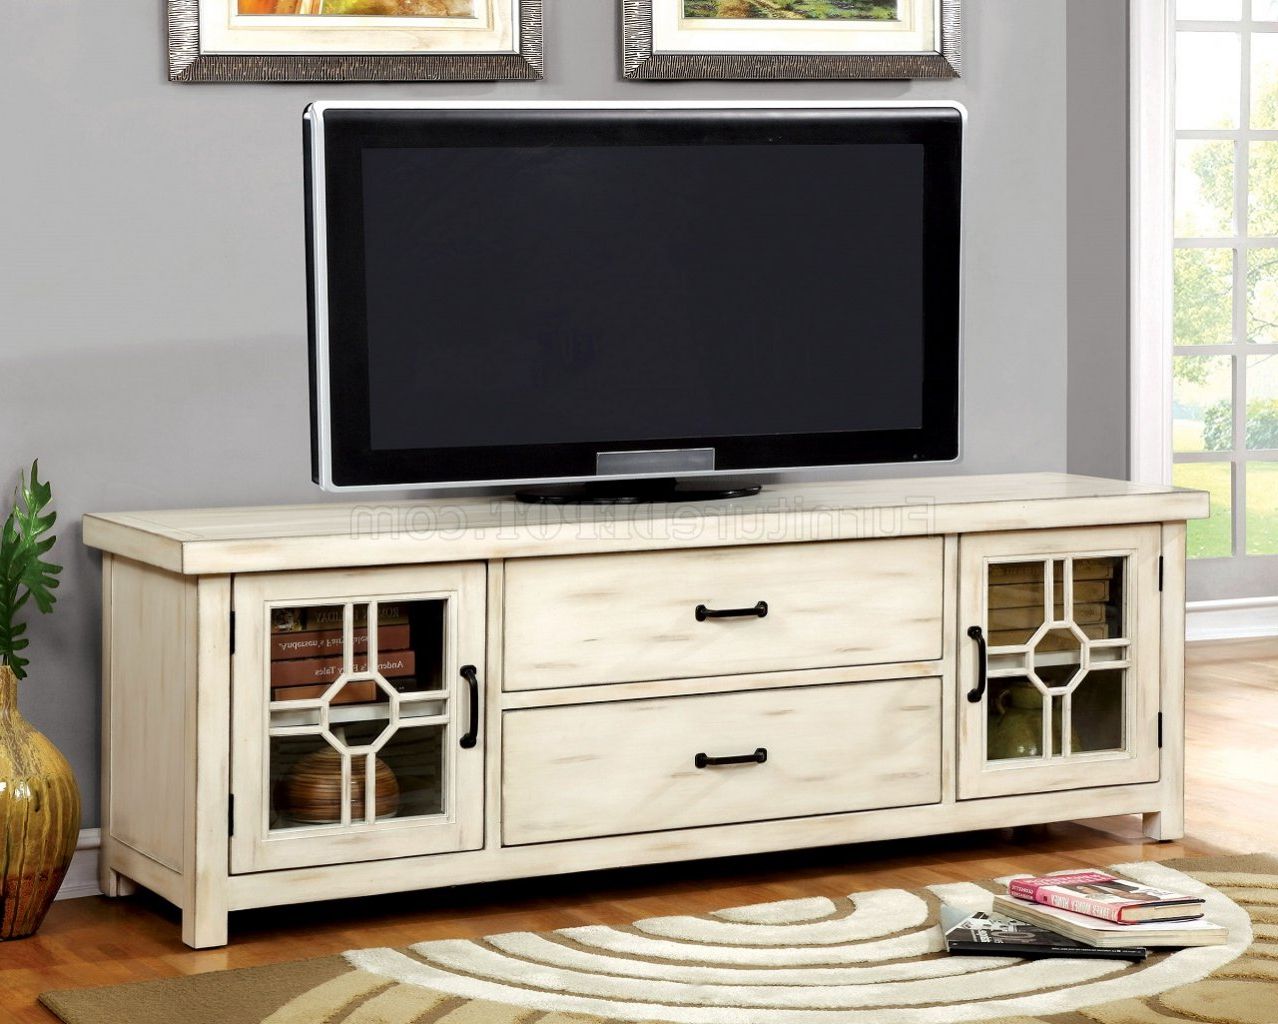 Ridley Cm5230 Tv Console In Antique Style White W/optional Within Alden Design Wooden Tv Stands With Storage Cabinet Espresso (View 4 of 20)